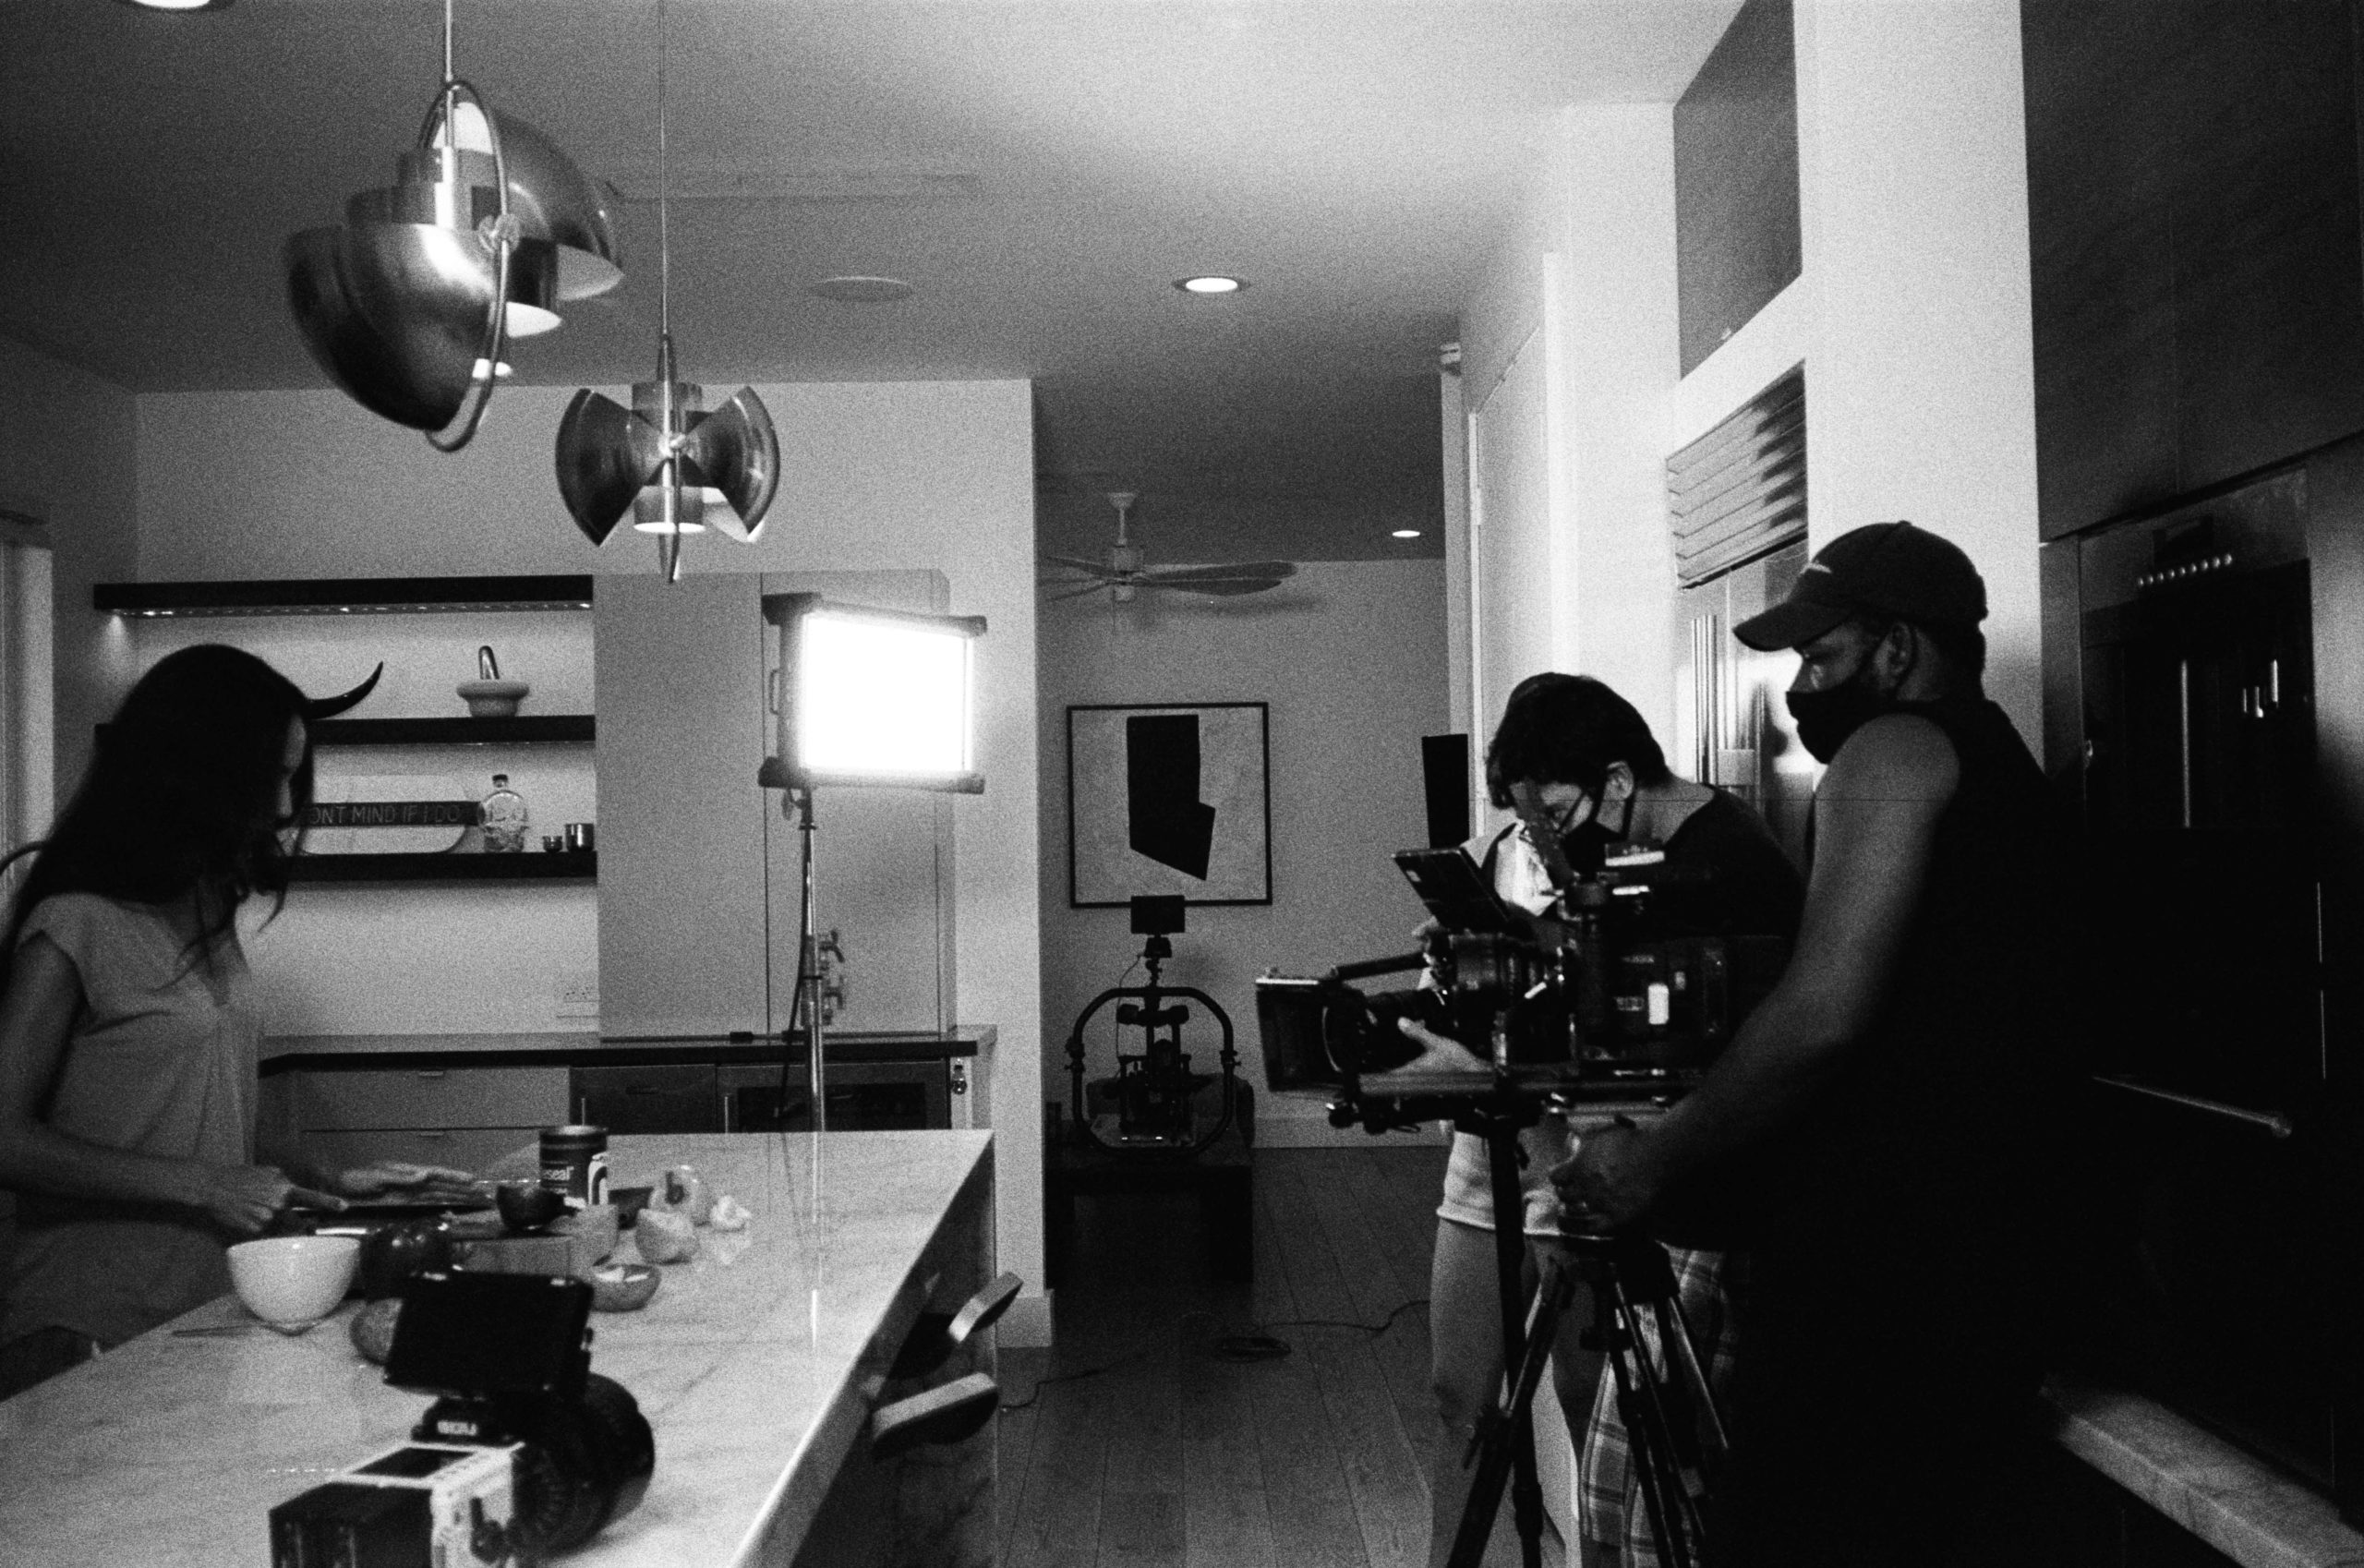 Black and white photo of a cooking show in progress with a woman cooking at the counter and two males wearing masks filming the show. There is another video camera on the counter as well.